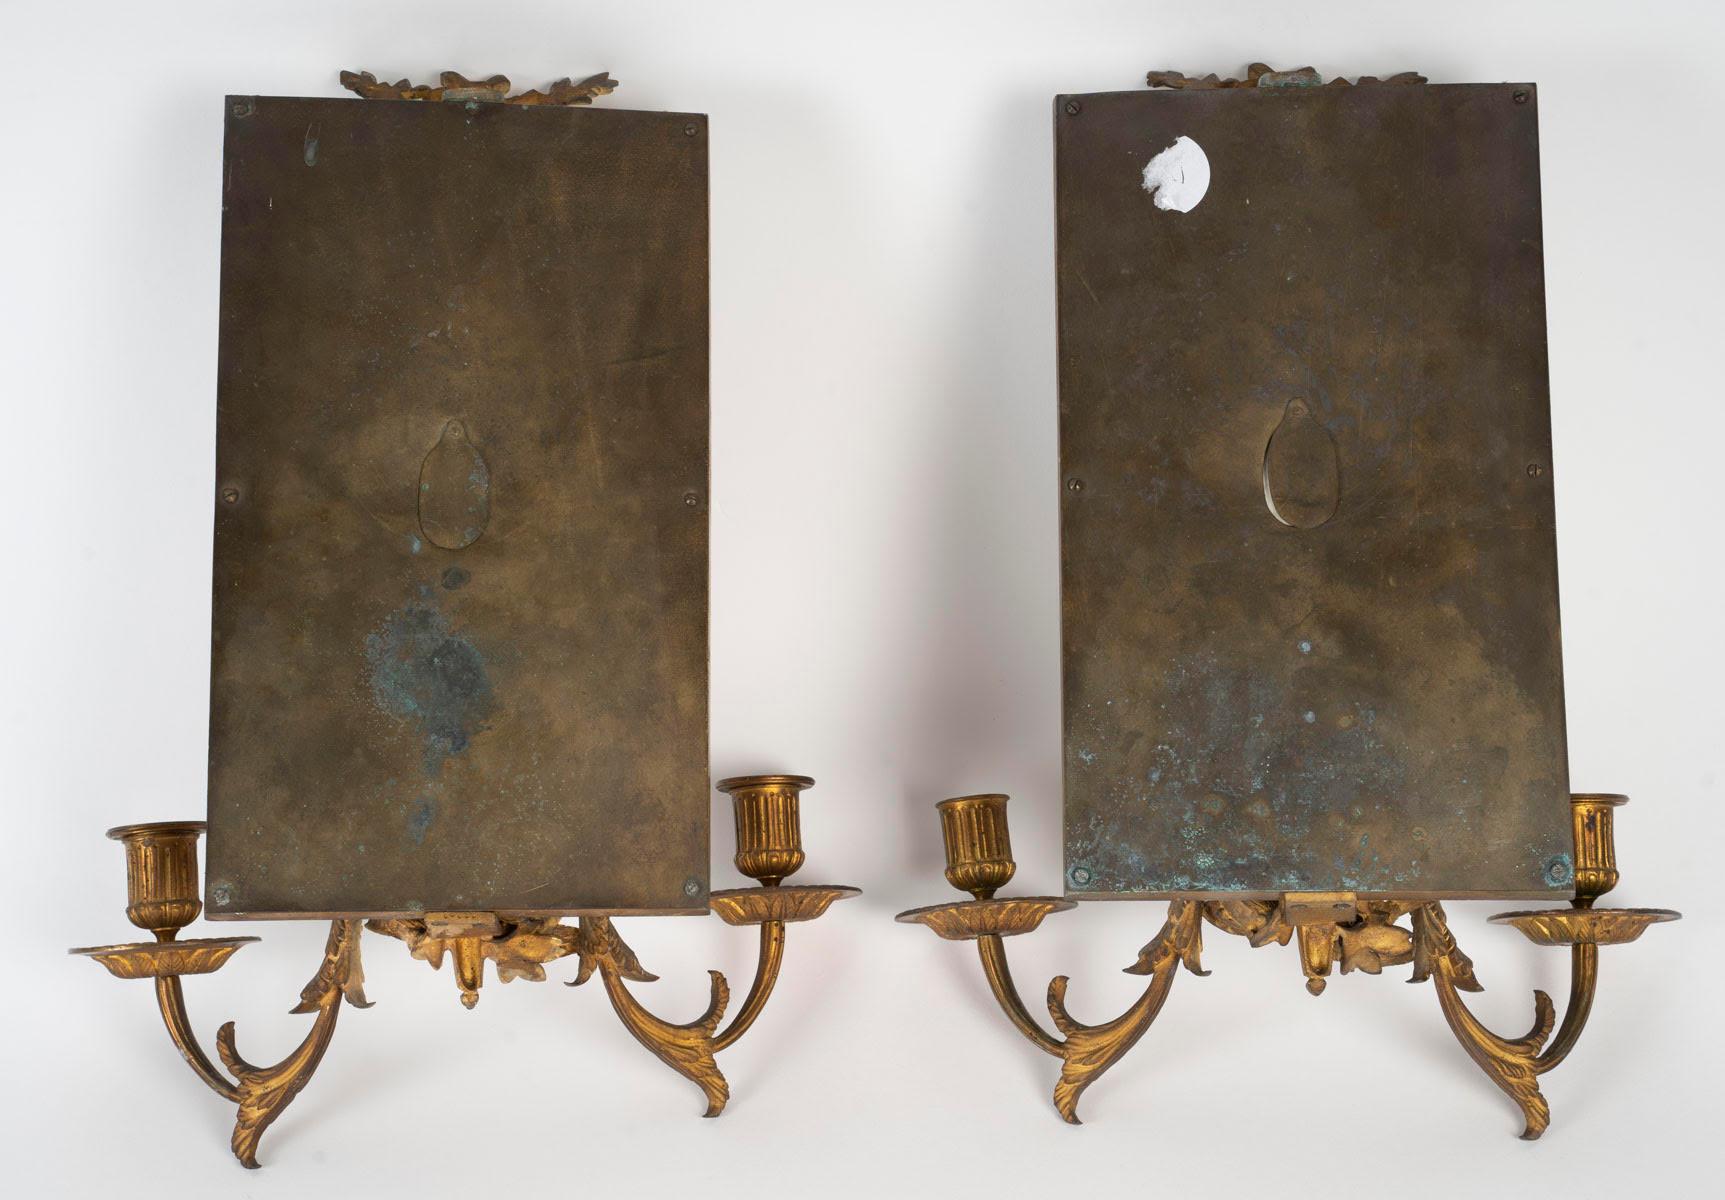 Pair of Wall Sconces in Gilt Bronze and Sèvres Porcelain, Napoleon Period. For Sale 2